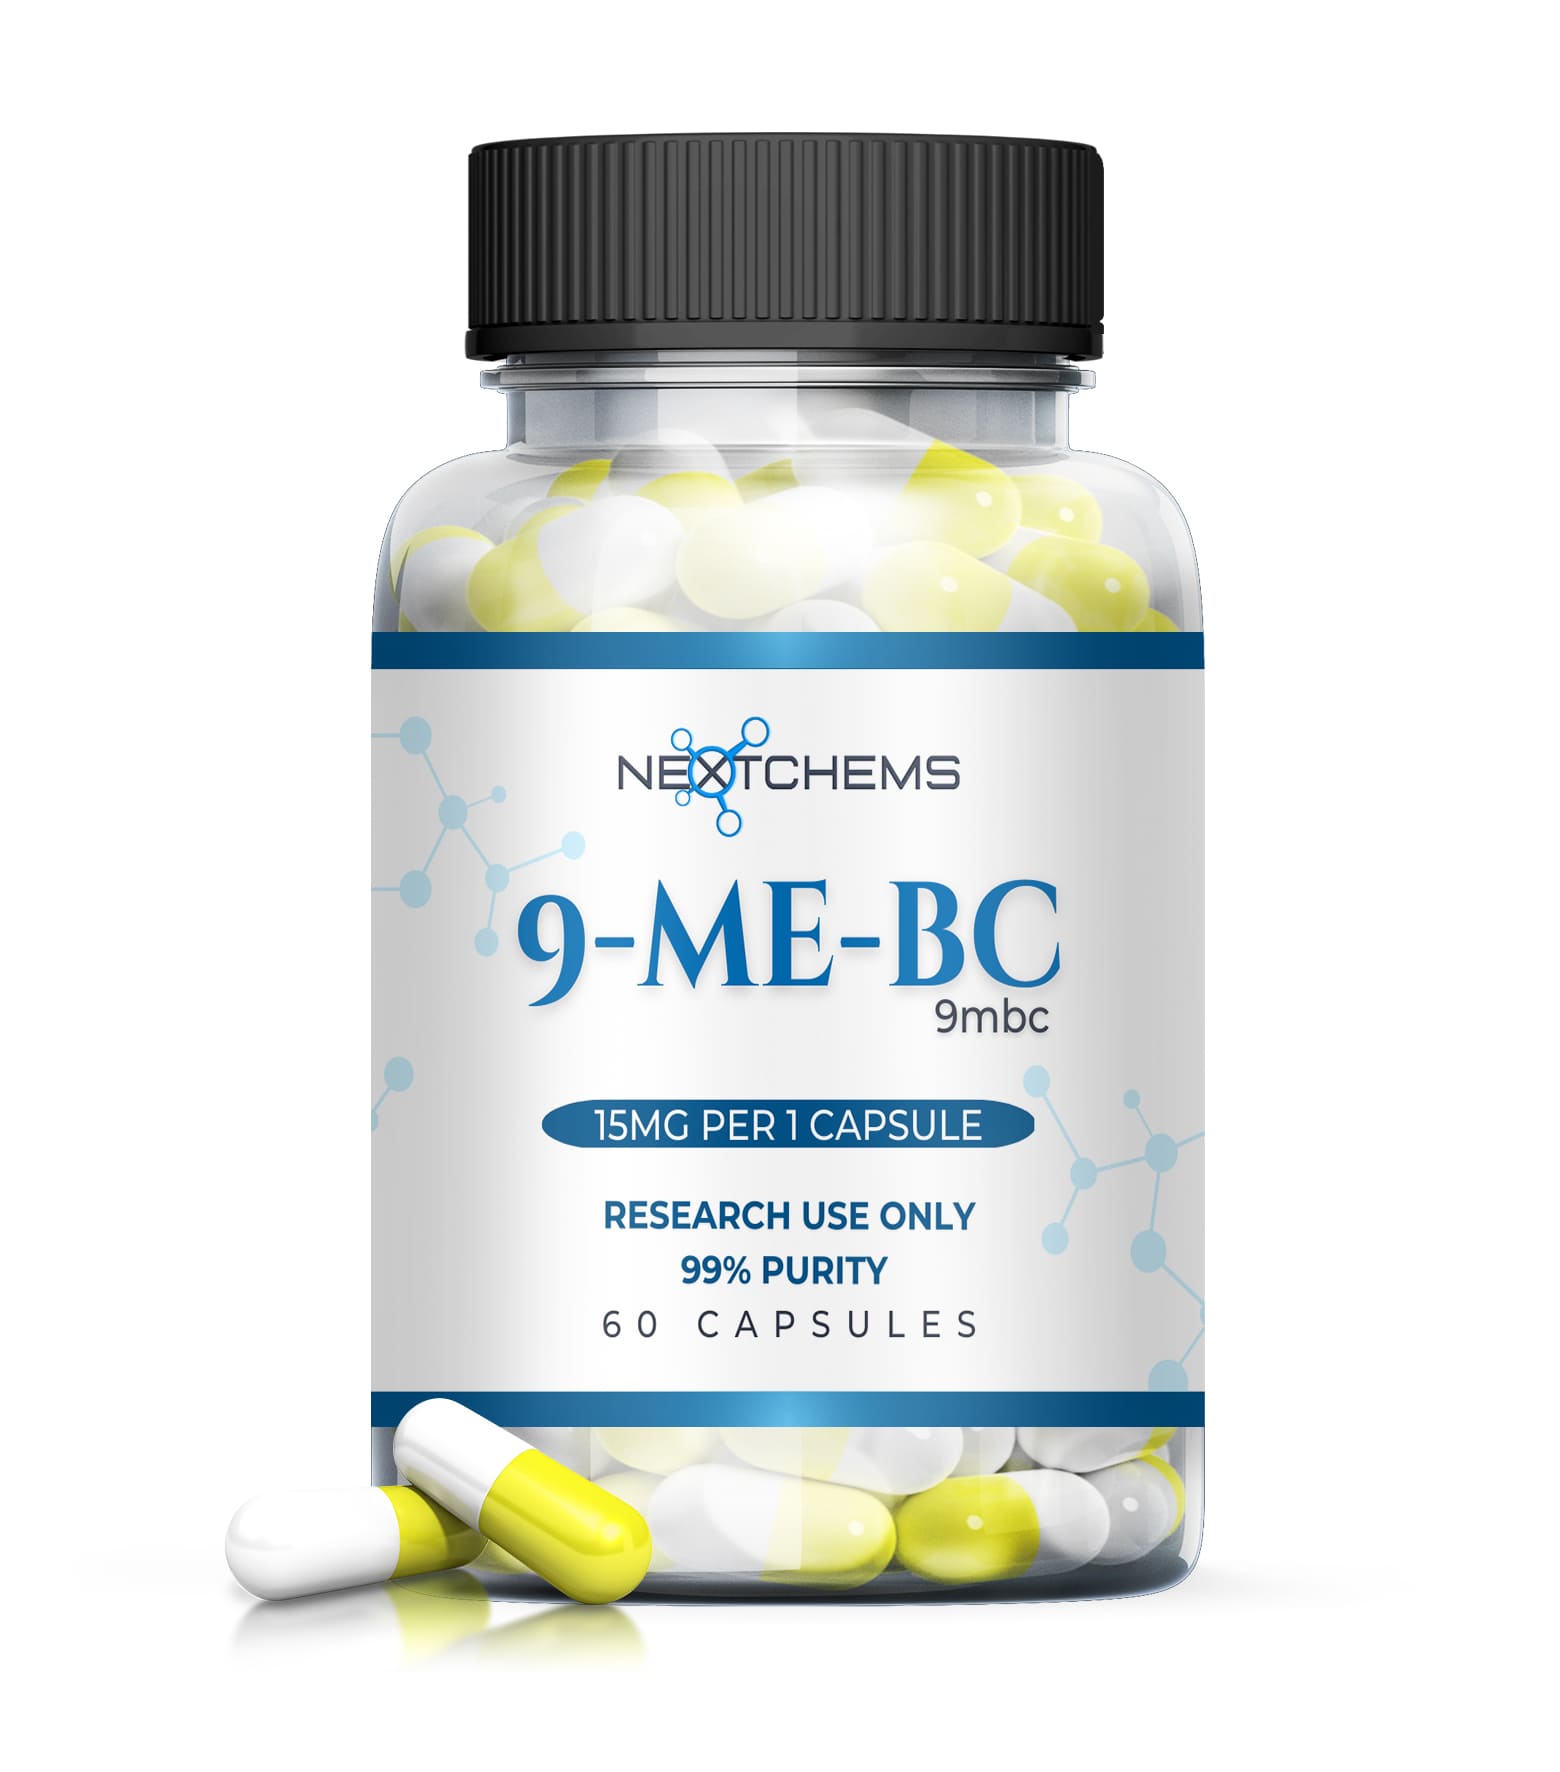 Next Chems 9-Me-BC product image